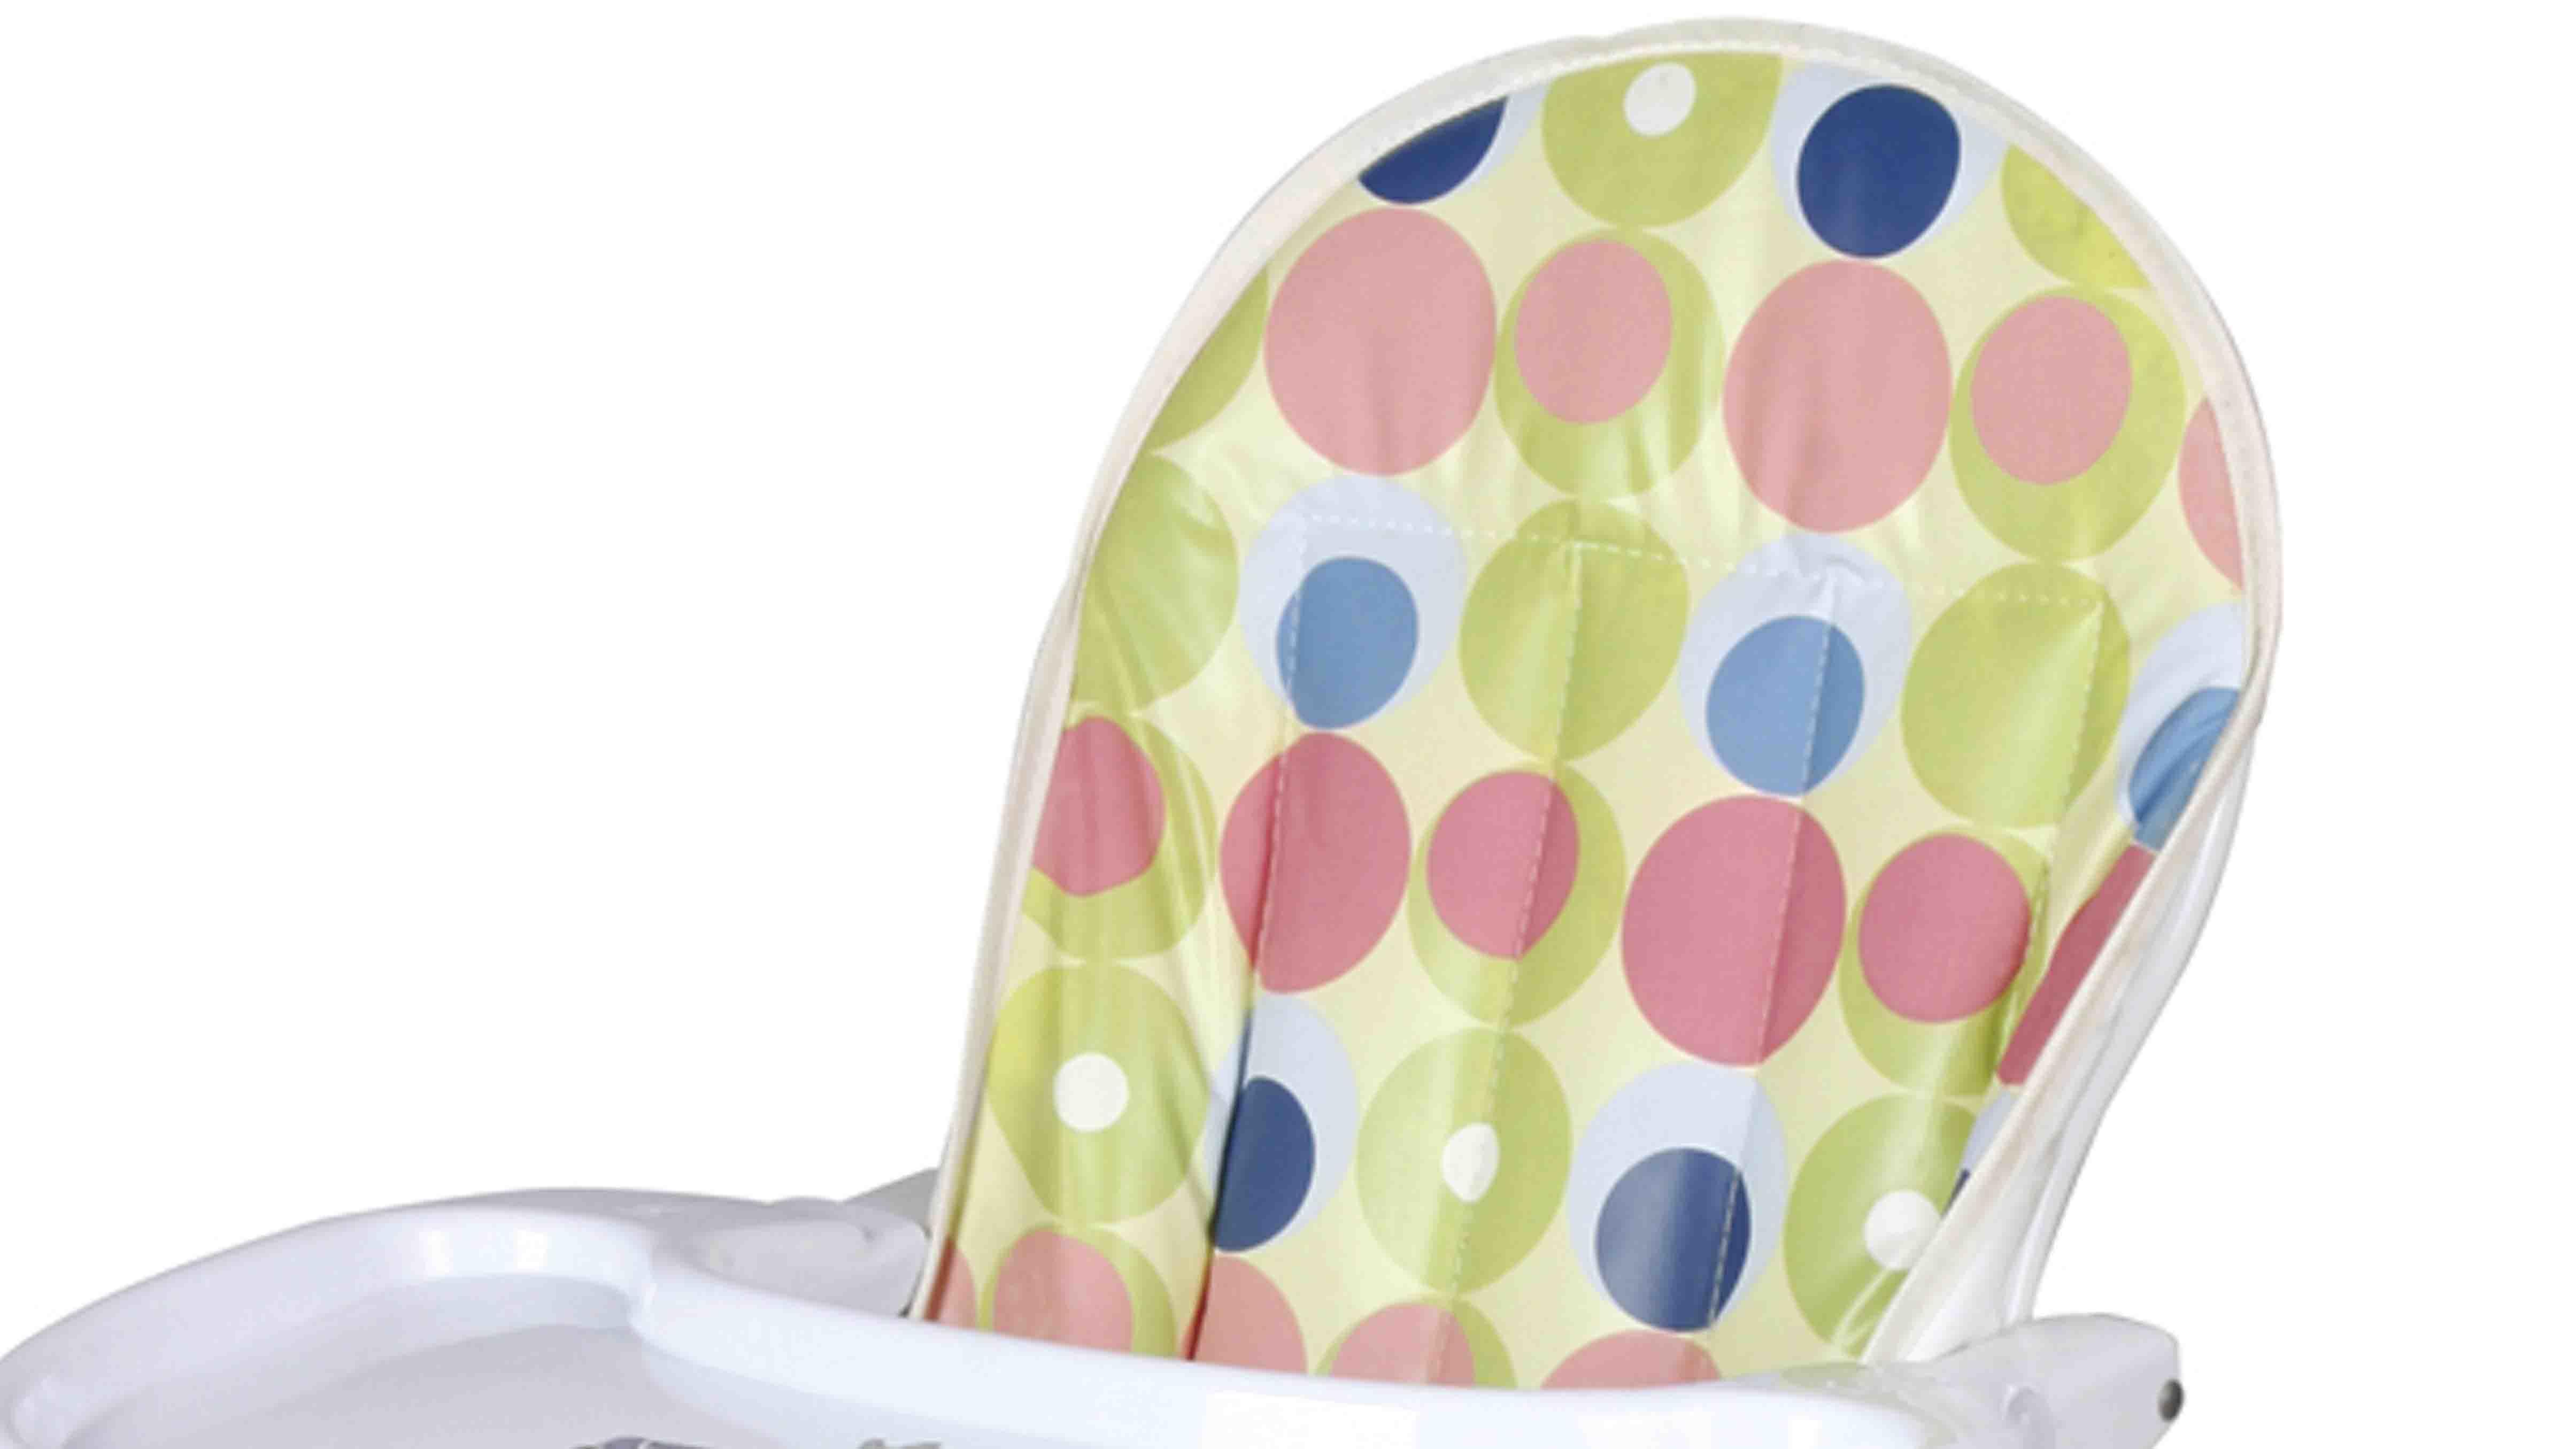 dining adjustable high chair for babies from China for home-2